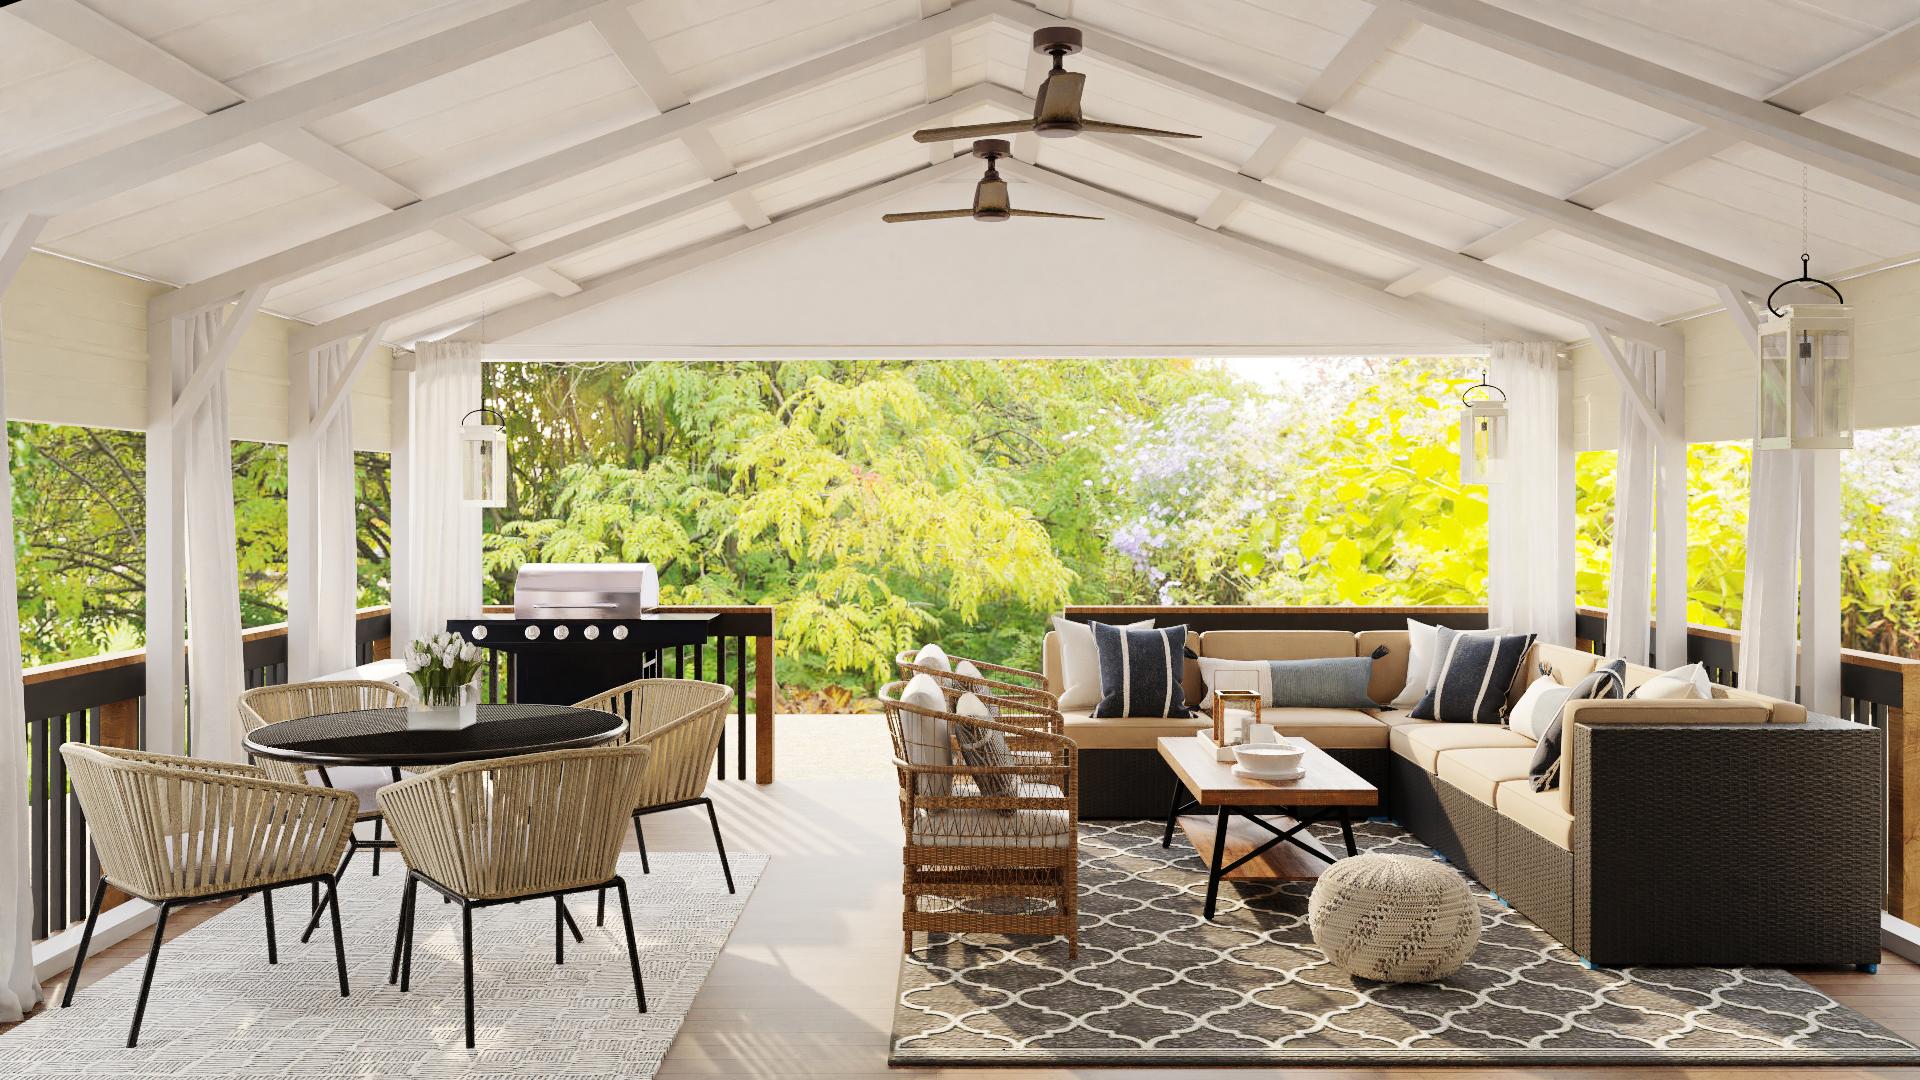 Transform your outdoor space into a summer paradise